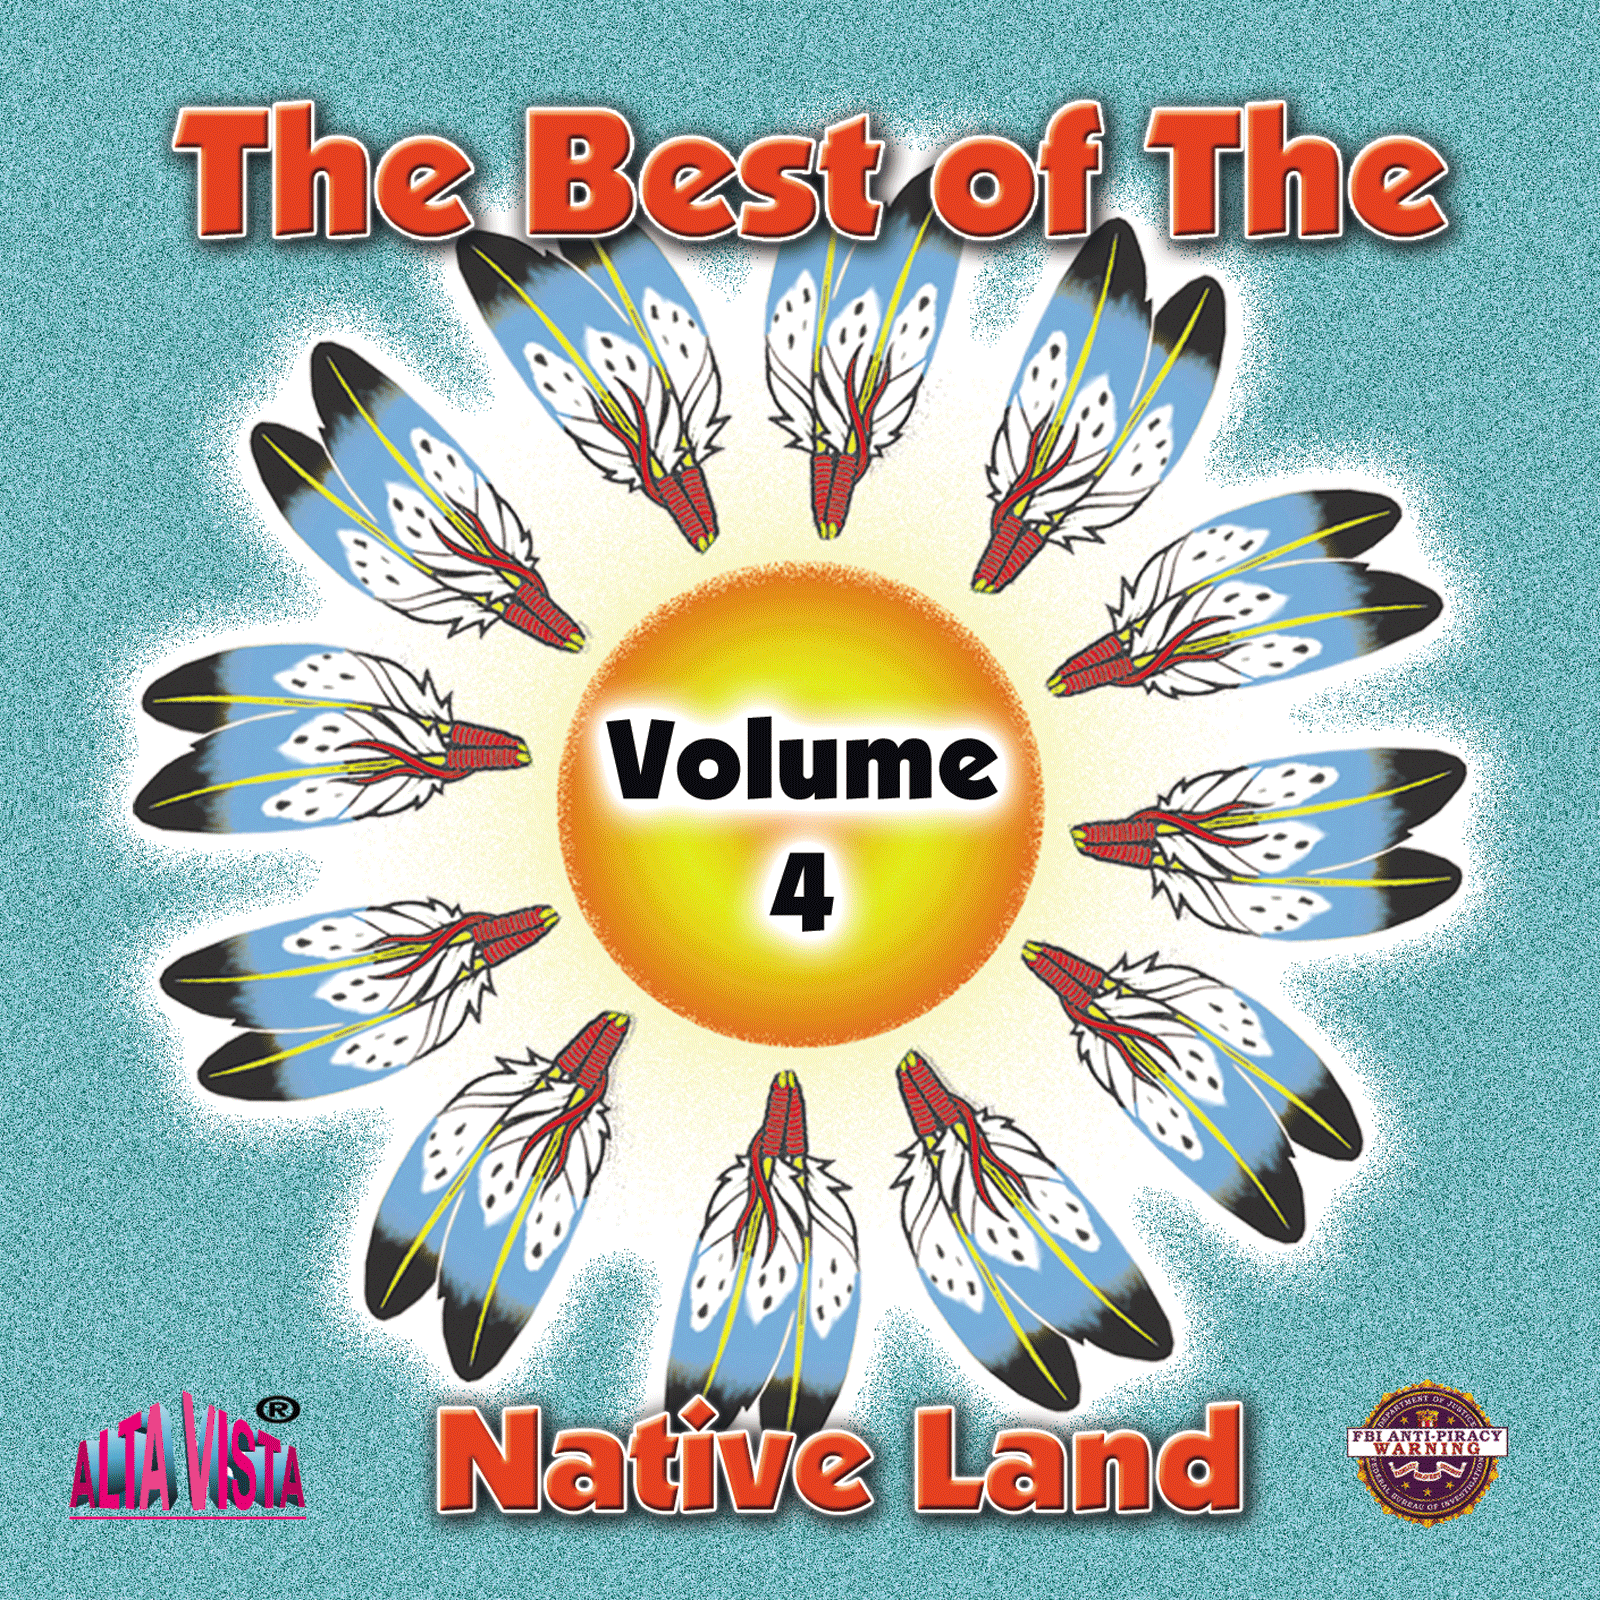 Best of the Native Land Vol 4 Downloadable songs